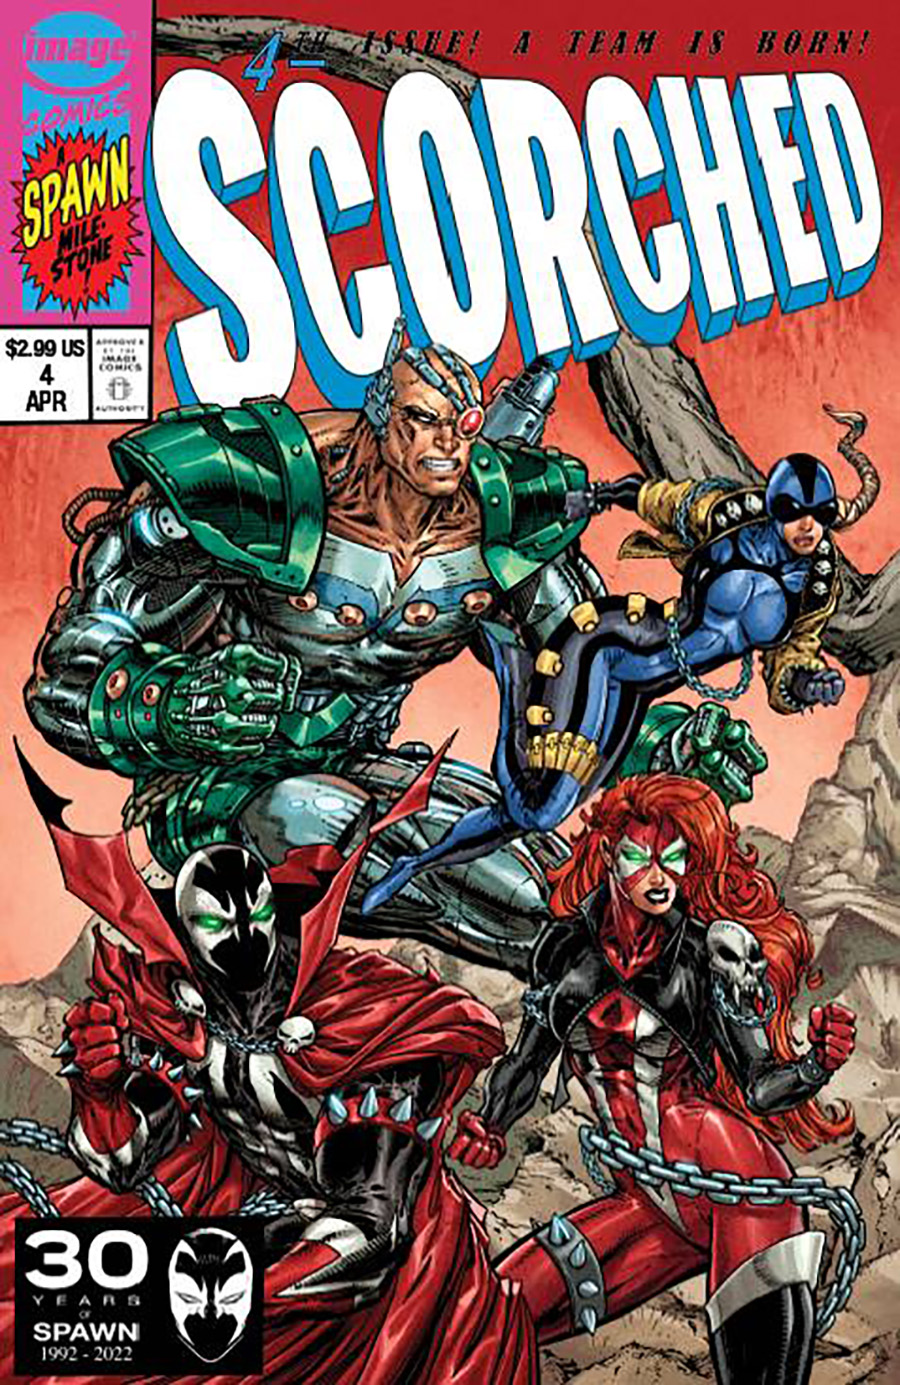 Scorched #4 Cover B Variant Todd McFarlane X-Men 1 Homage Connecting Cover